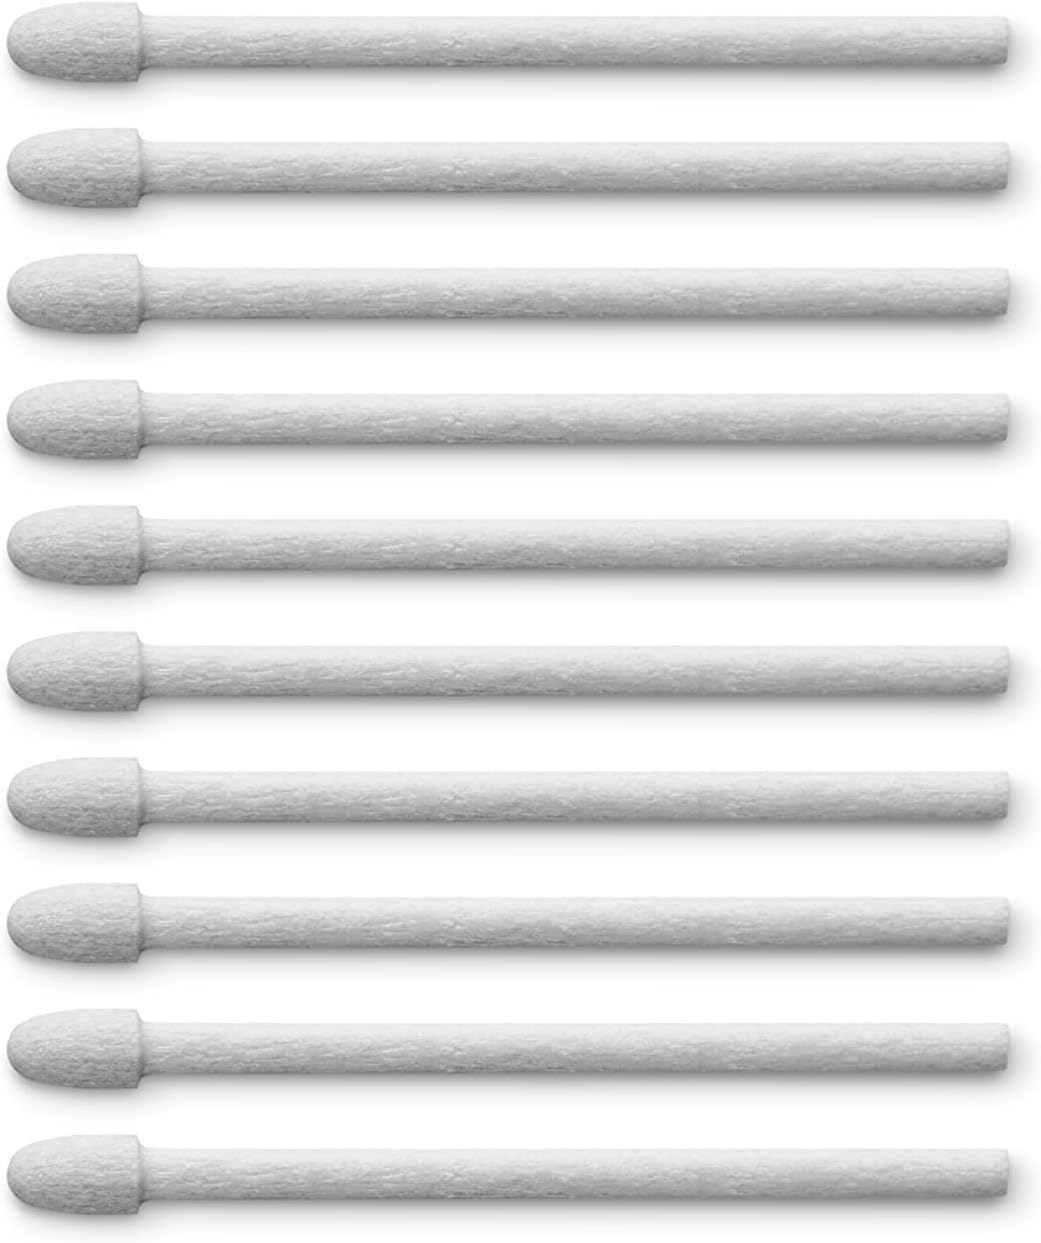 Dr Grip Digital and Wacom one Replacement Tips (10 Pack)